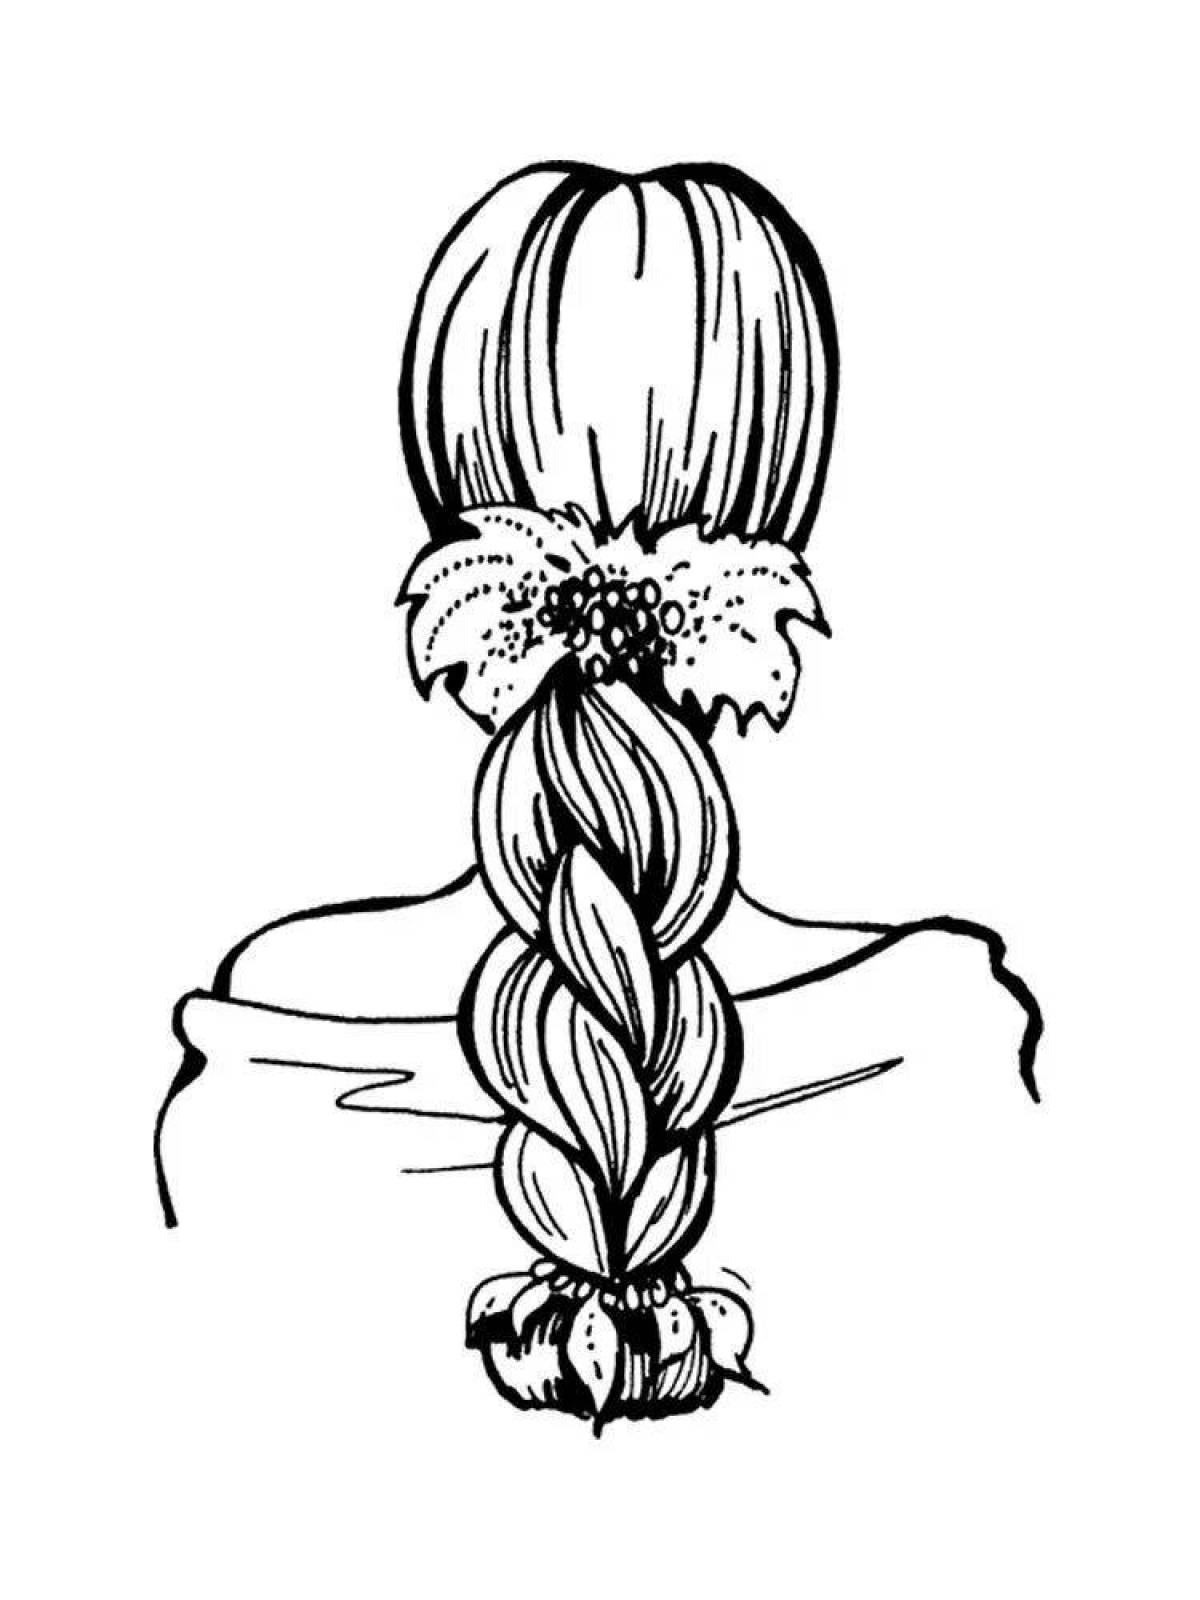 Playful braid coloring page